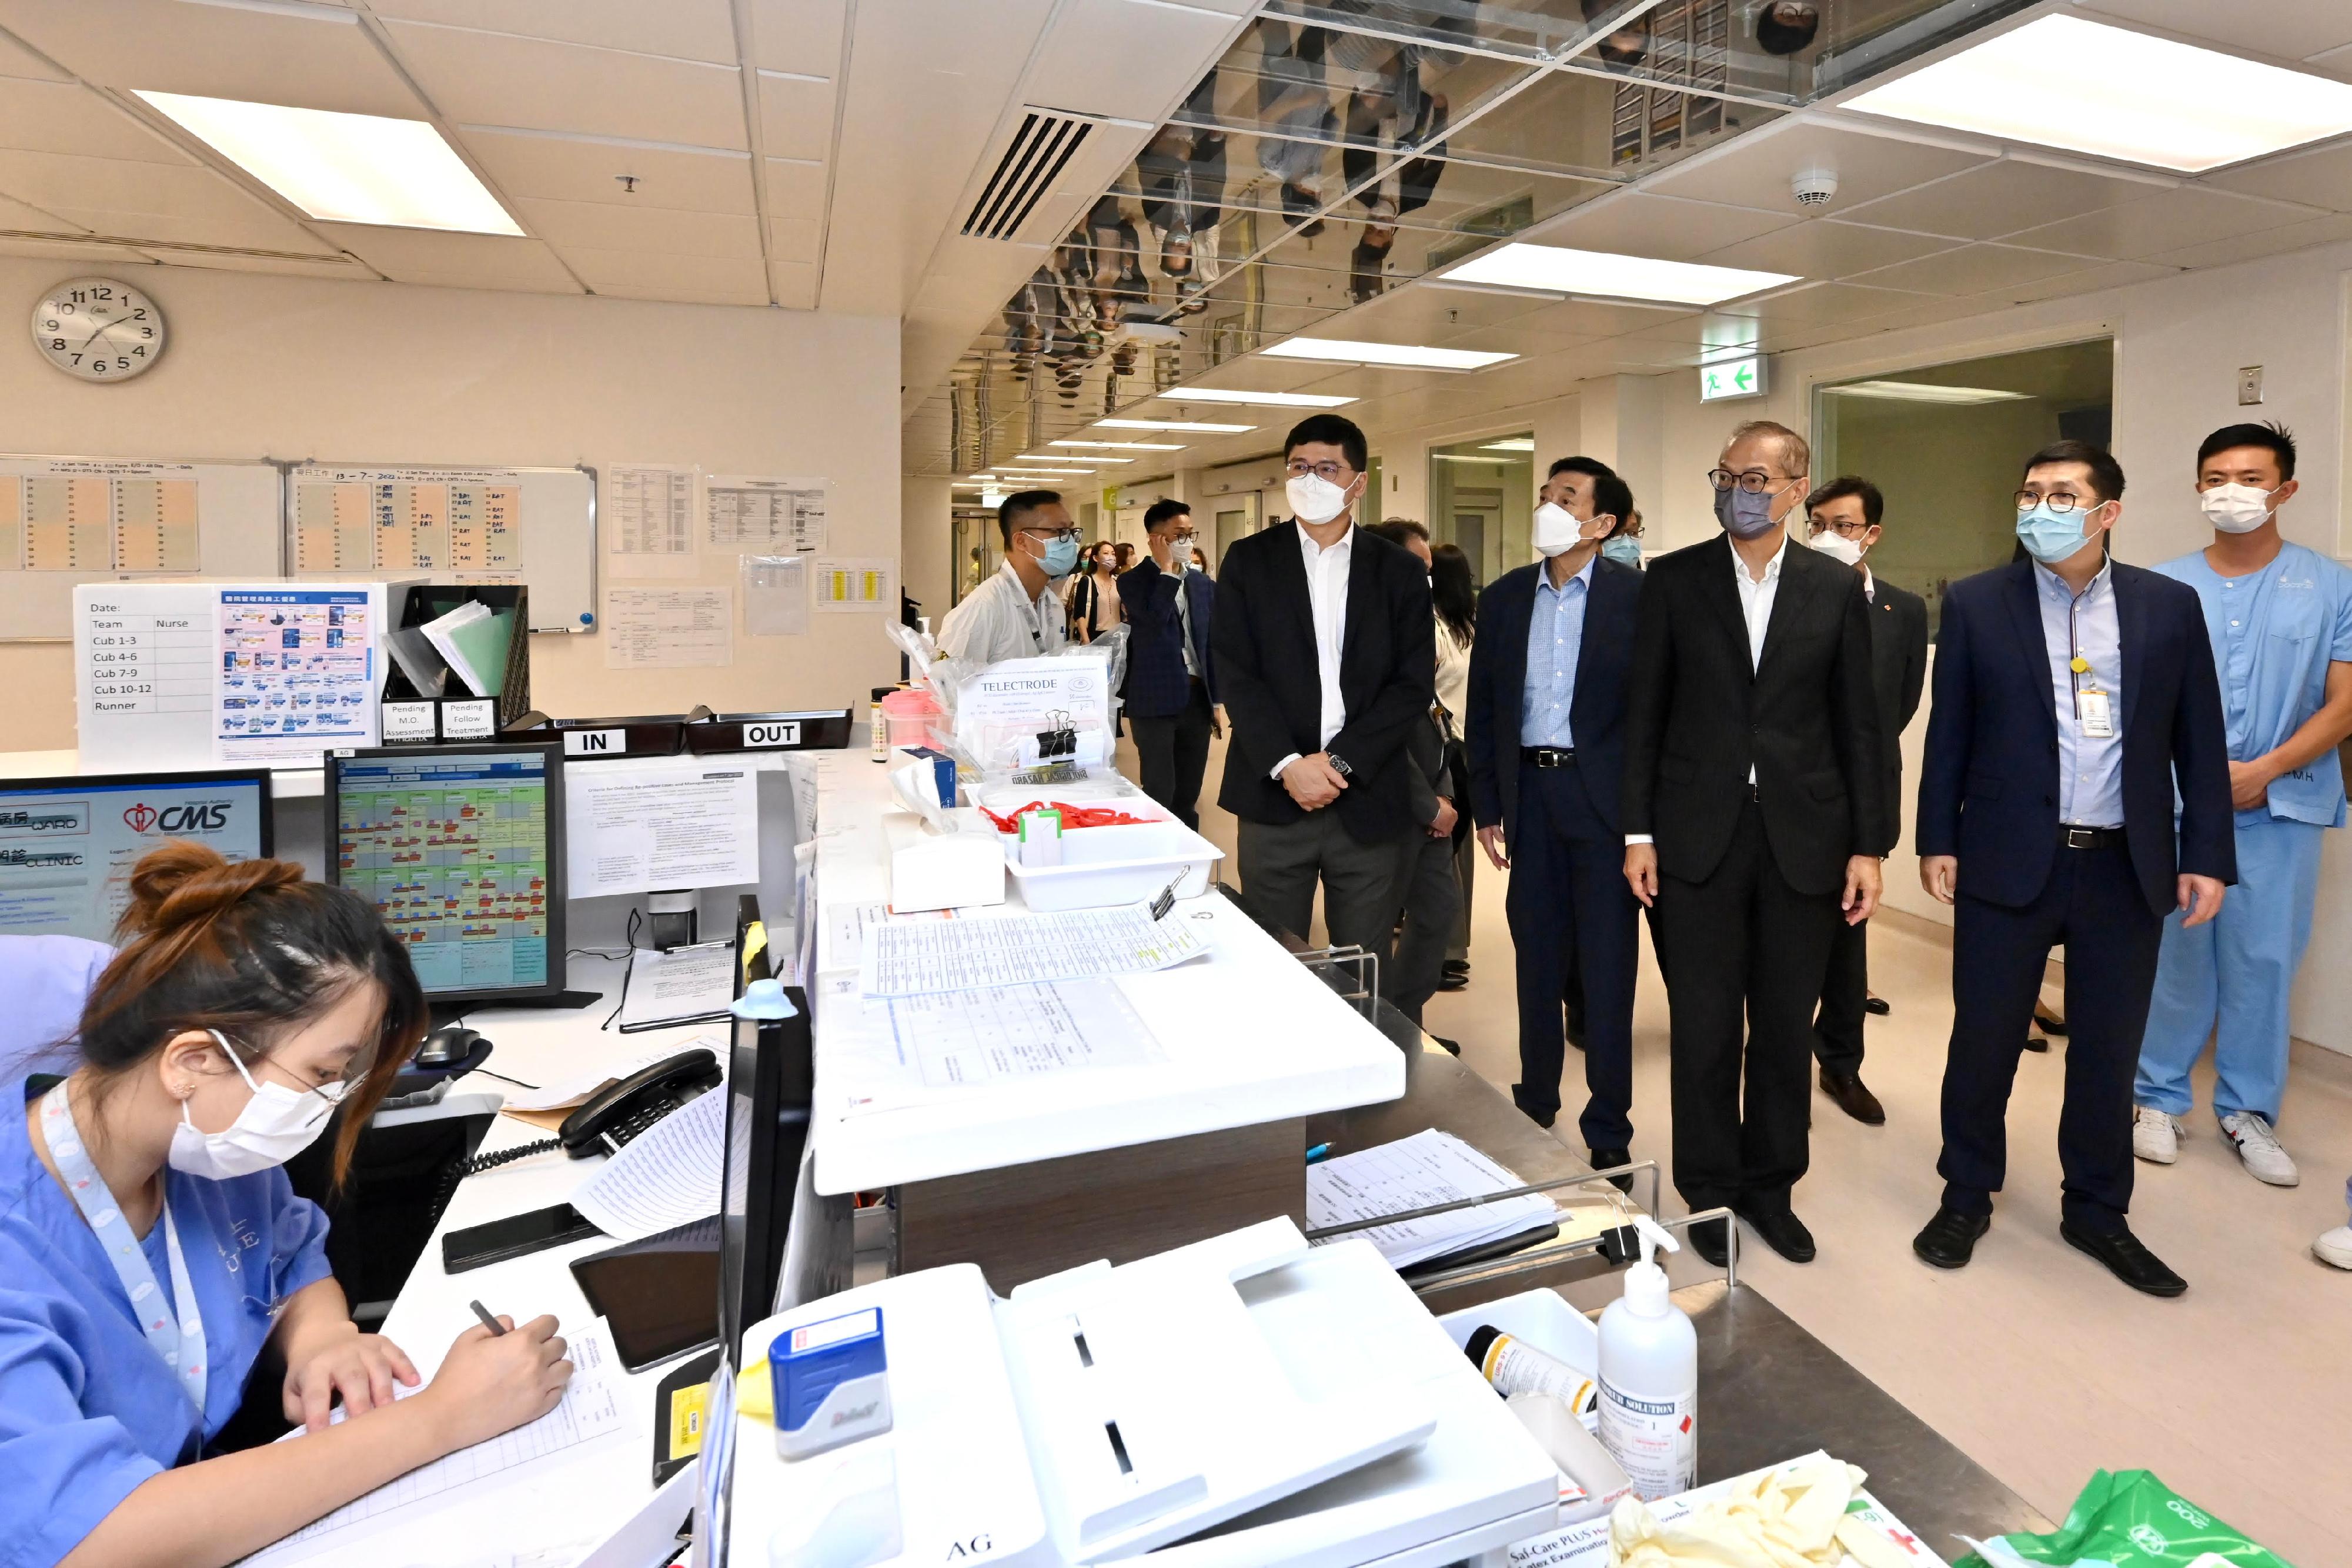 The Secretary for Health, Professor Lo Chung-mau (third left), inspected the North Lantau Hospital Hong Kong Infection Control Centre to have a better grasp on the treatment and nursing care provided by the healthcare personnel for COVID-19 patients. Looking on are the Chairman of the Hospital Authority (HA), Mr Henry Fan (second left), and the Chief Executive of the HA, Dr Tony Ko (first left).